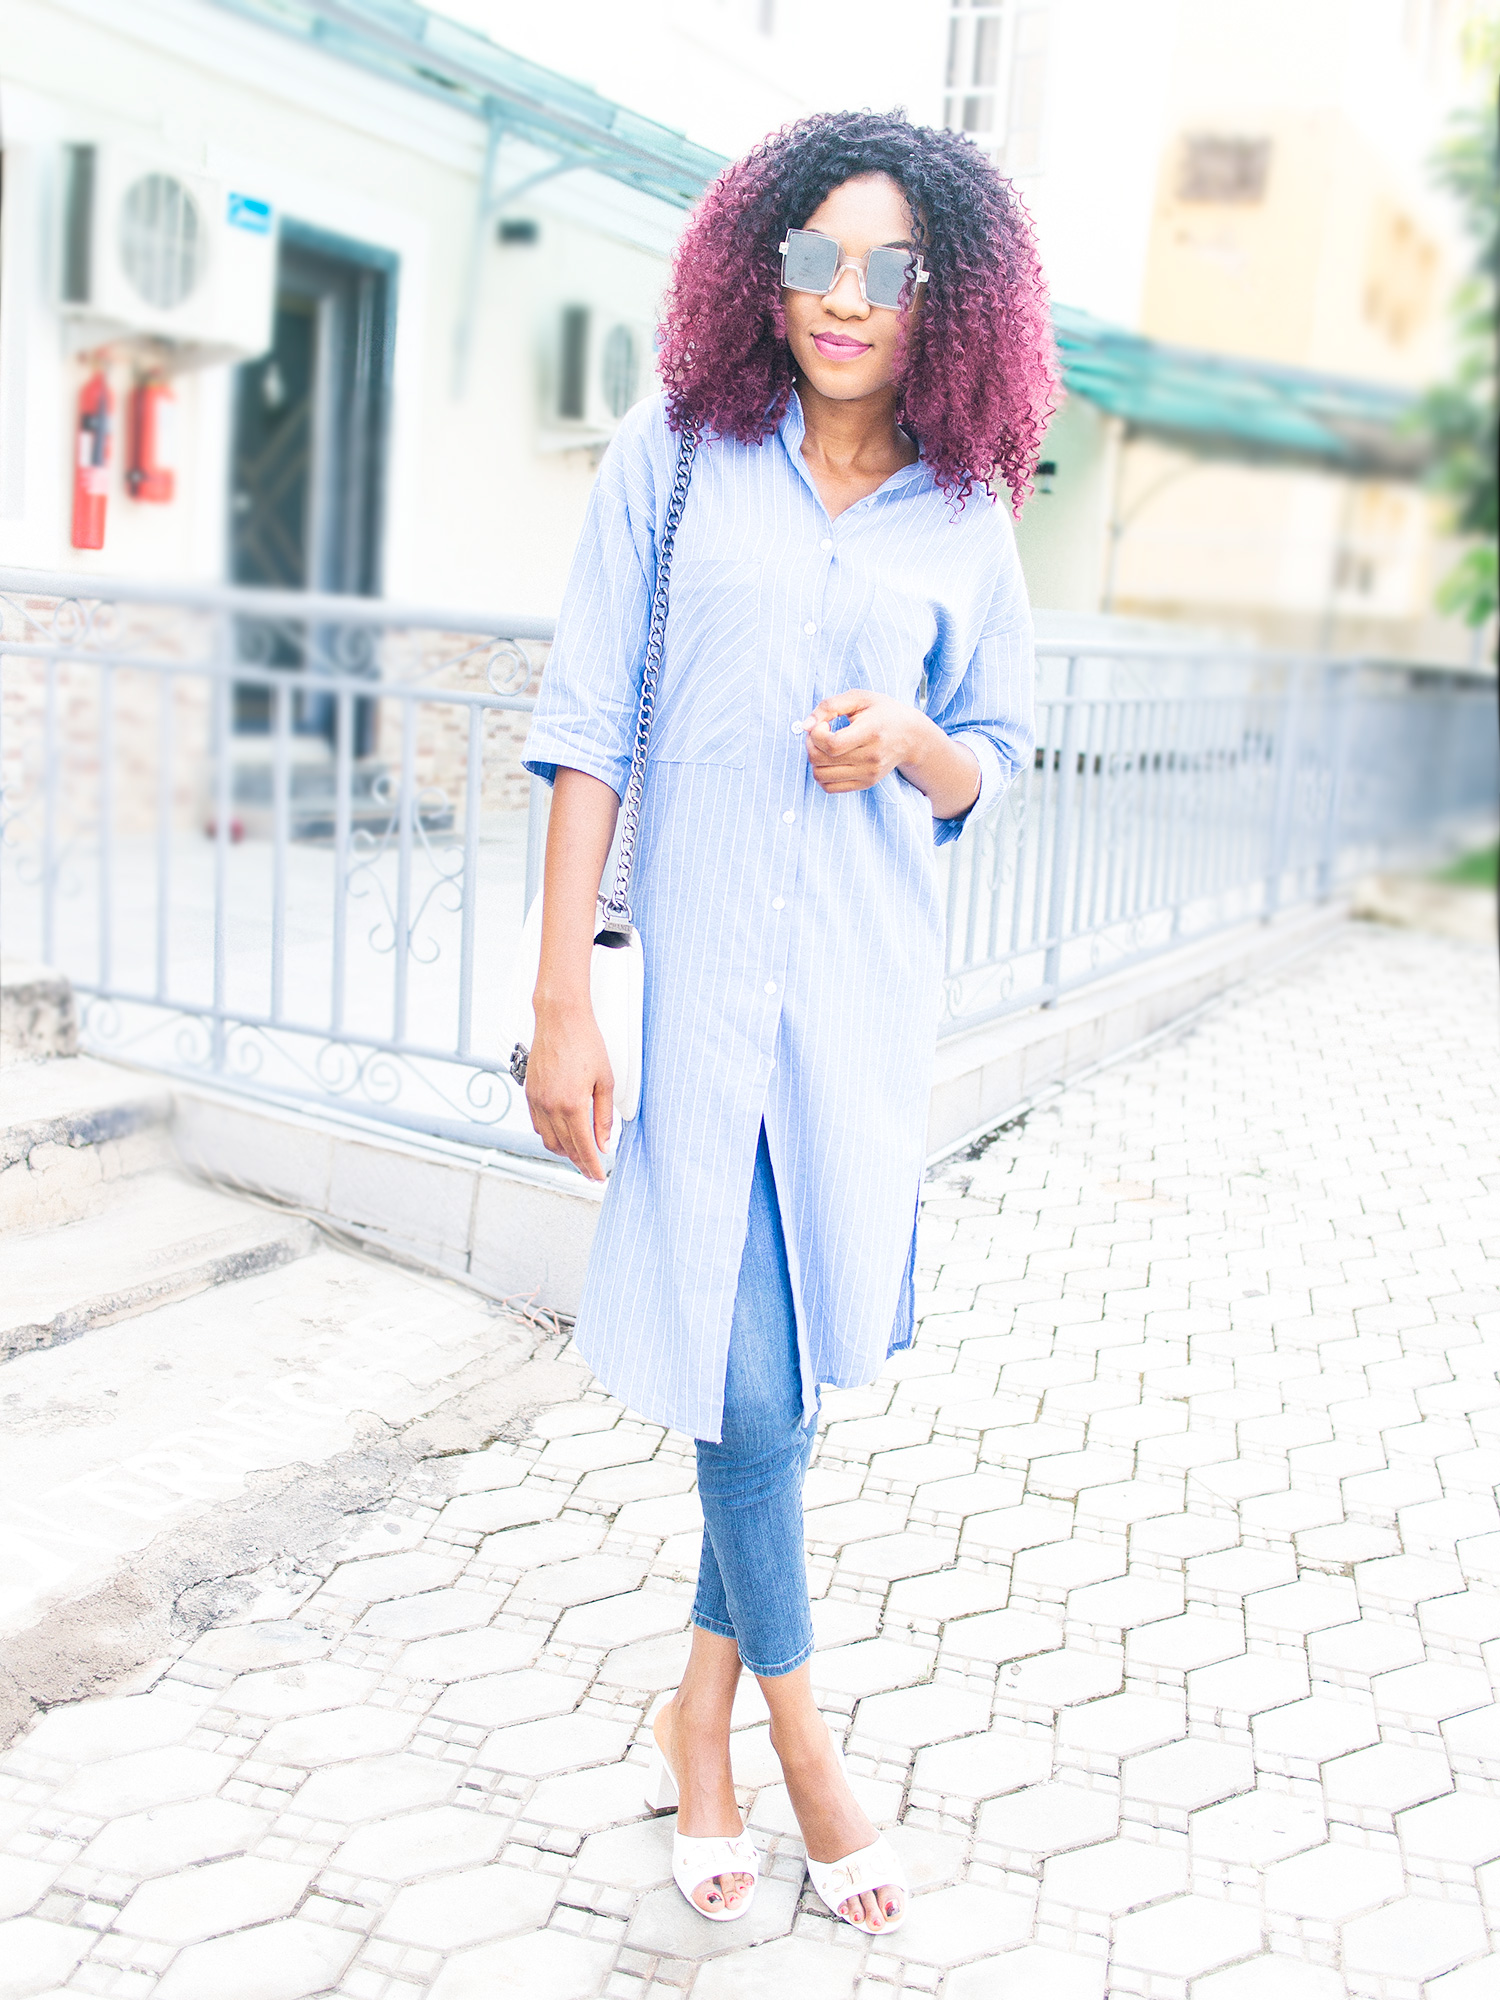 Shirt dress on jeggings outfit